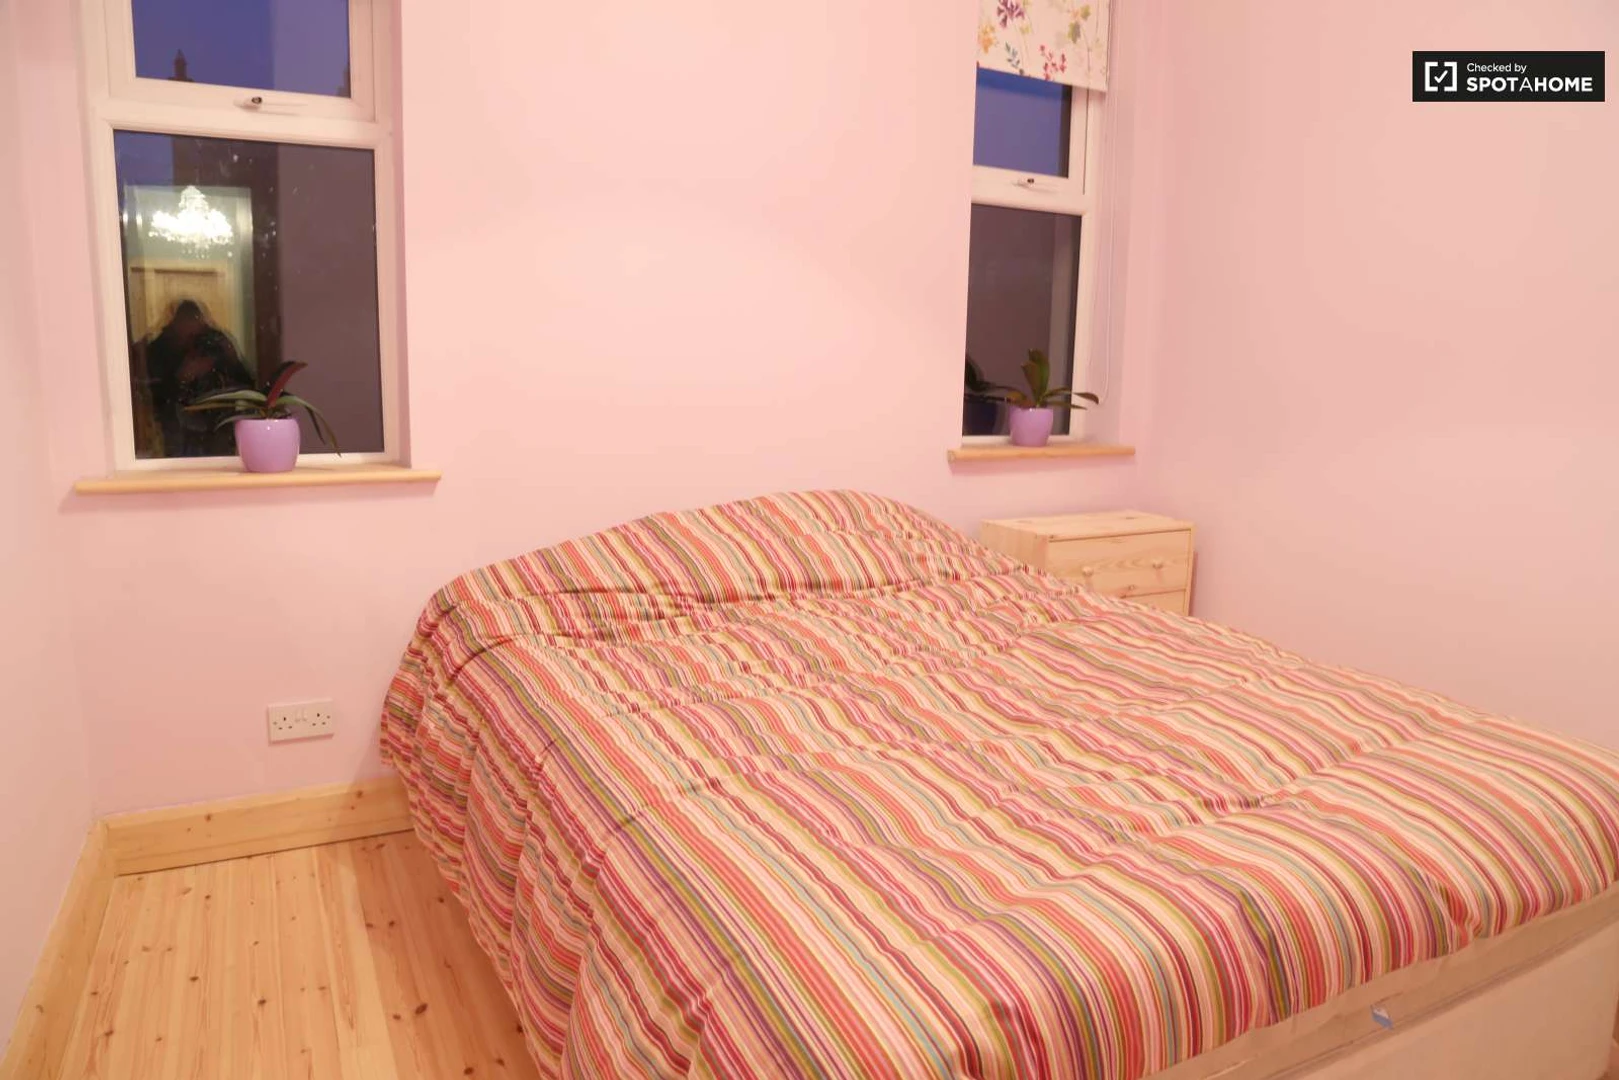 Renting rooms by the month in dublin